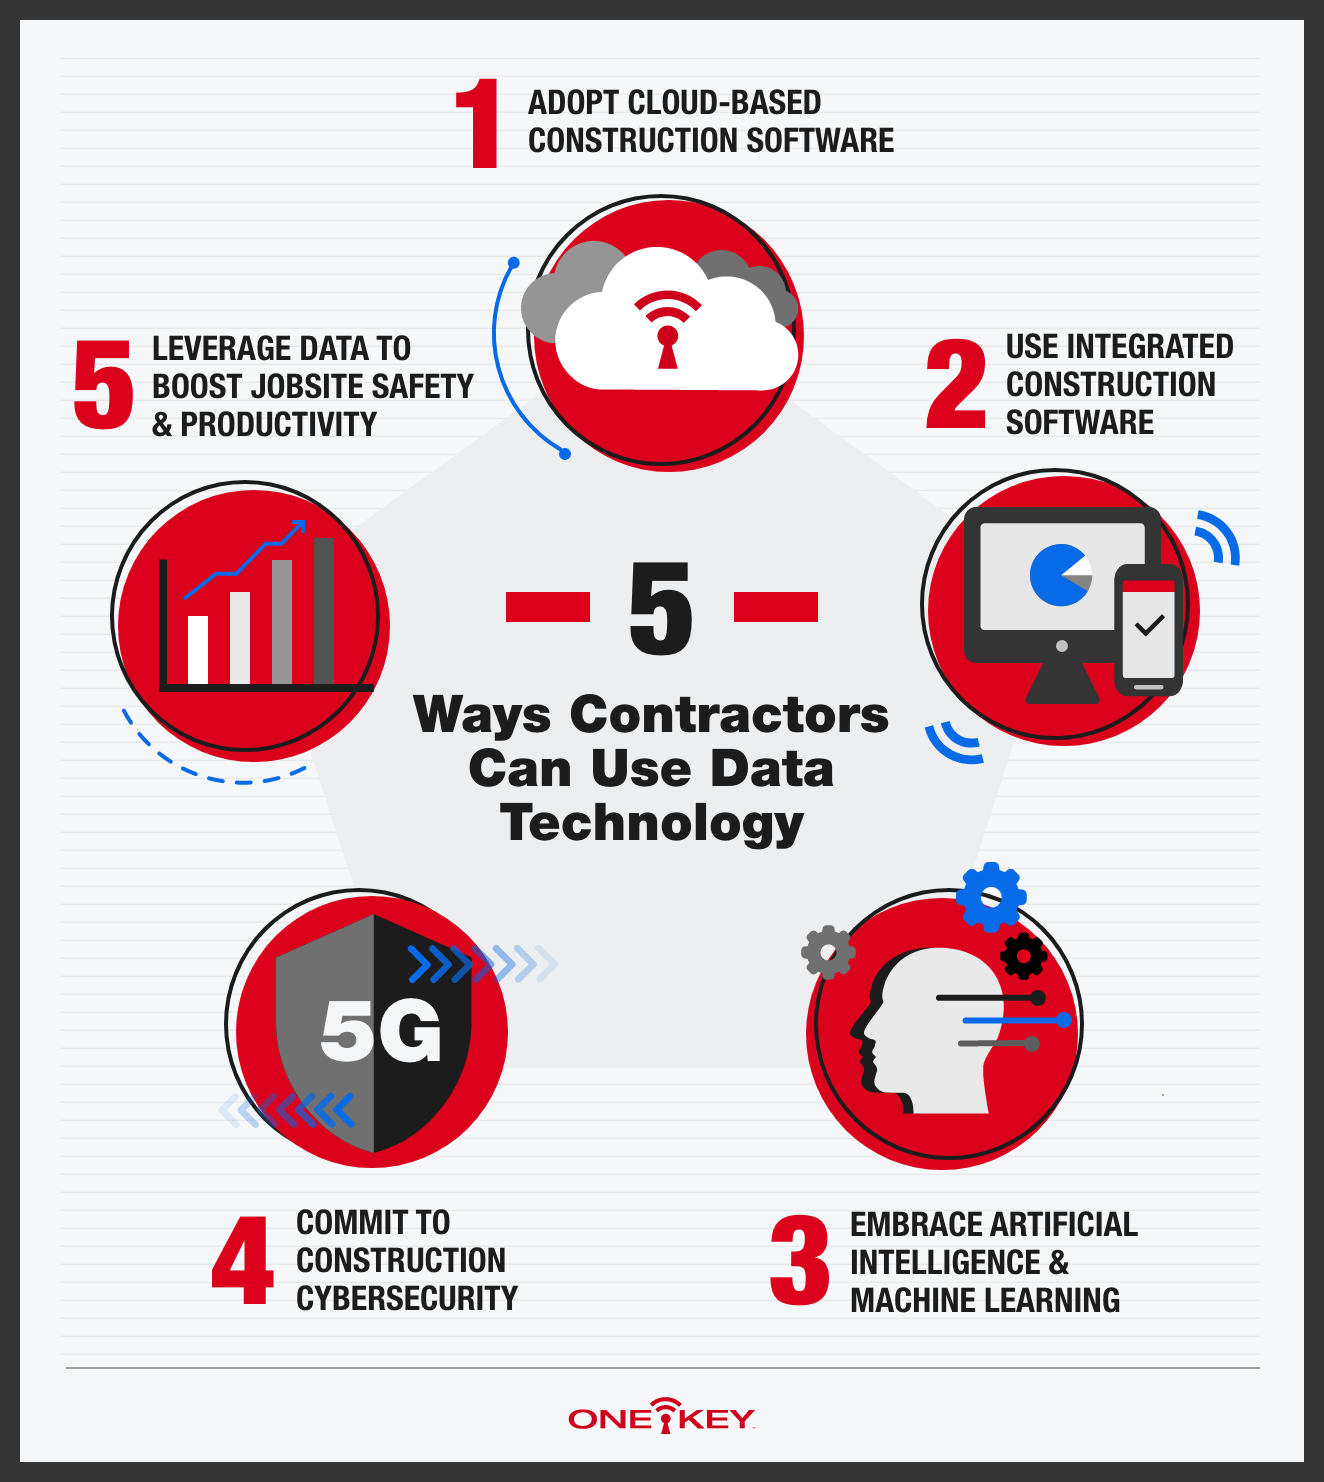 An infographic detailing 5 ways to implement data on construction sites